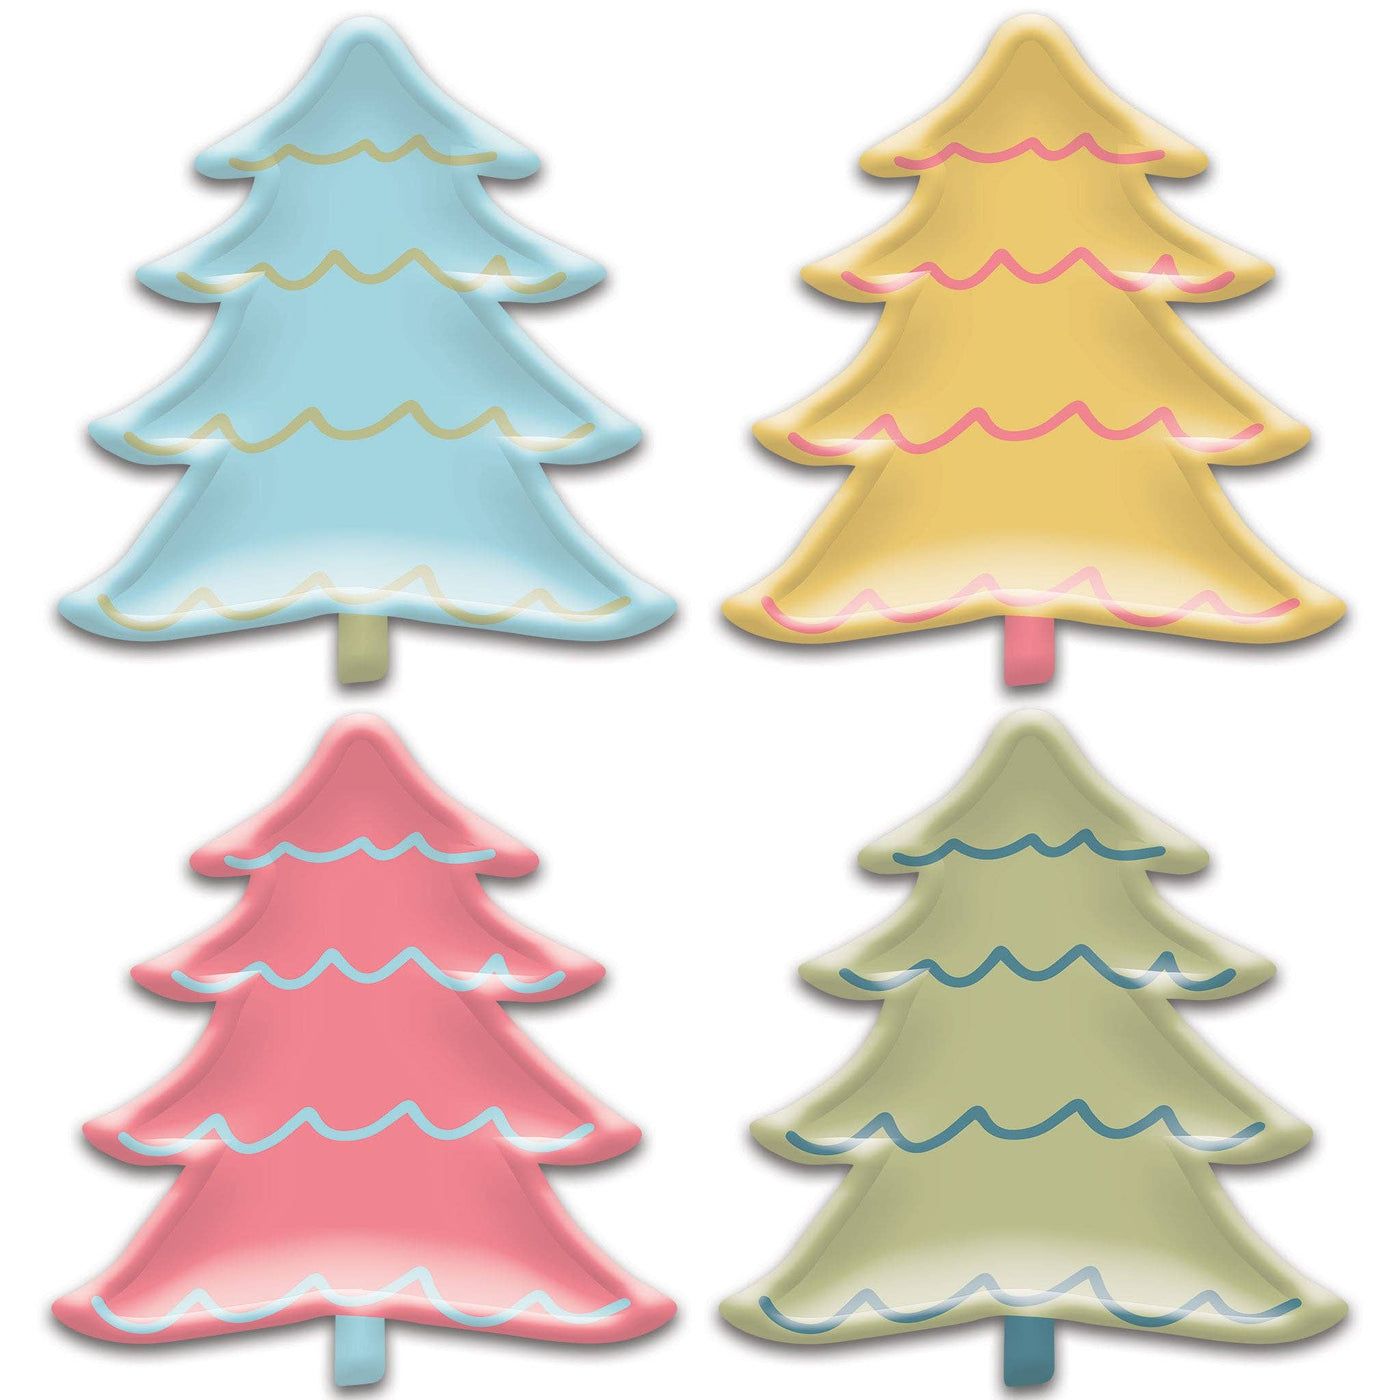 Bright Holiday Tree Shaped Paper Plate Set